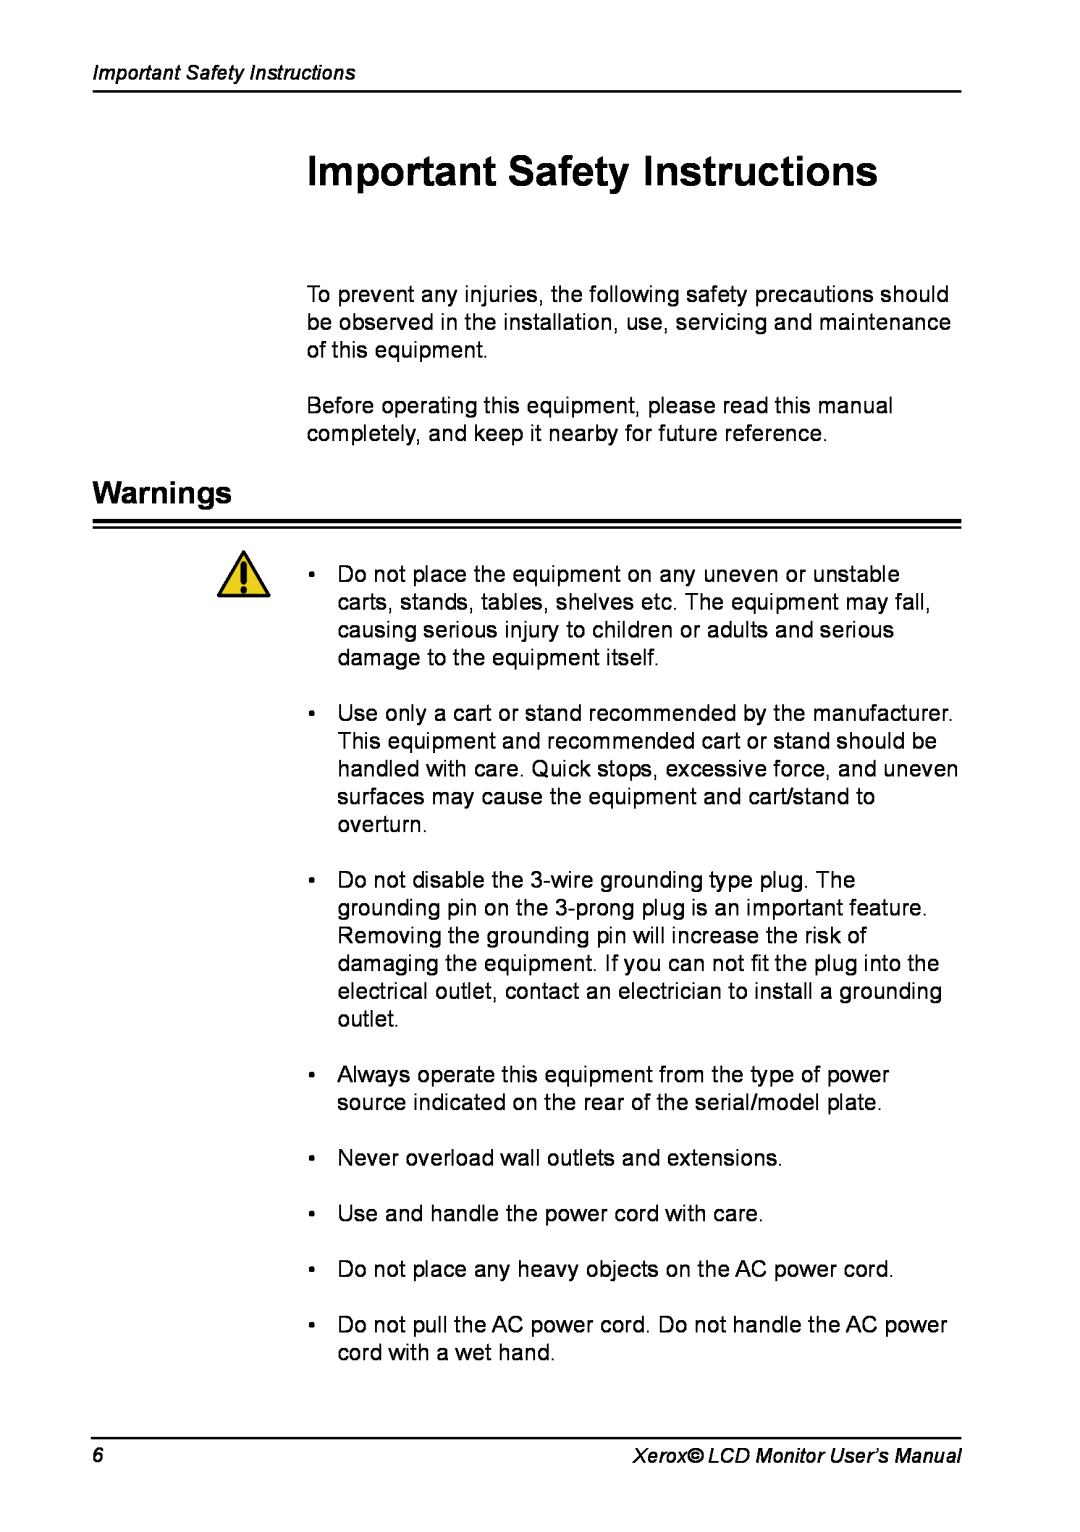 Xerox XM7-19w manual Important Safety Instructions, Warnings 